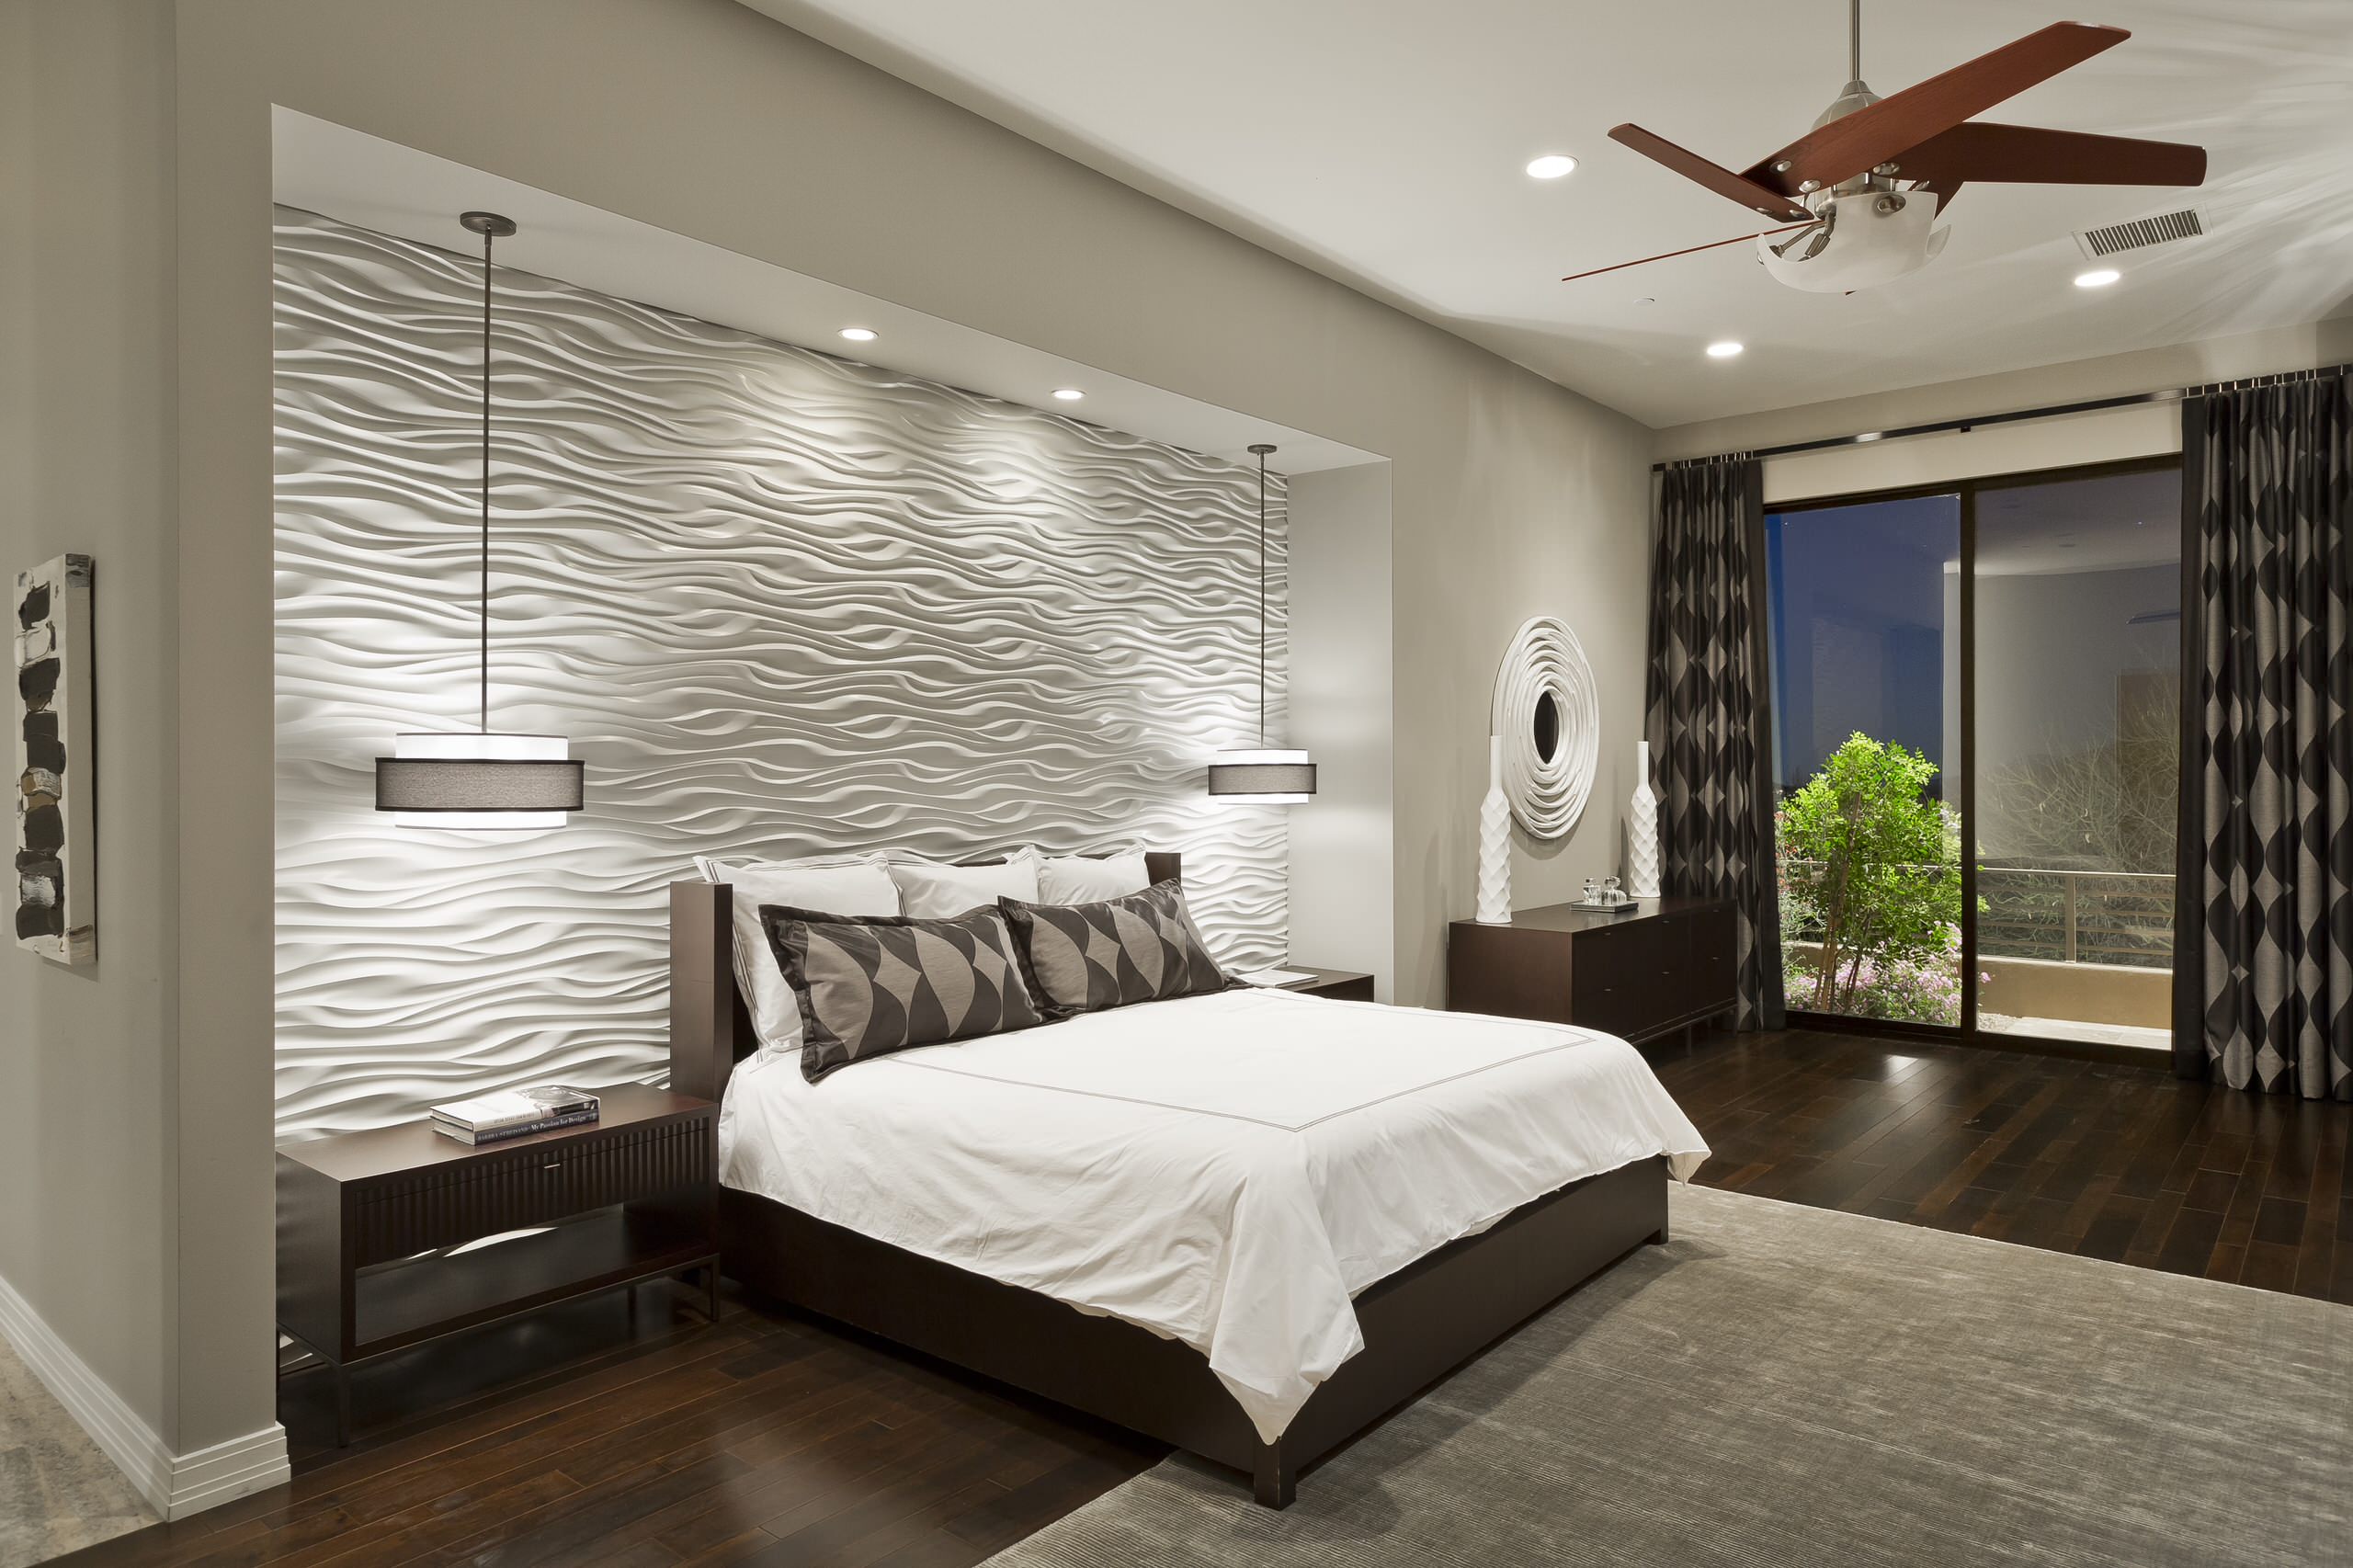 Accent Wall Behind Bed - Photos & Ideas | Houzz